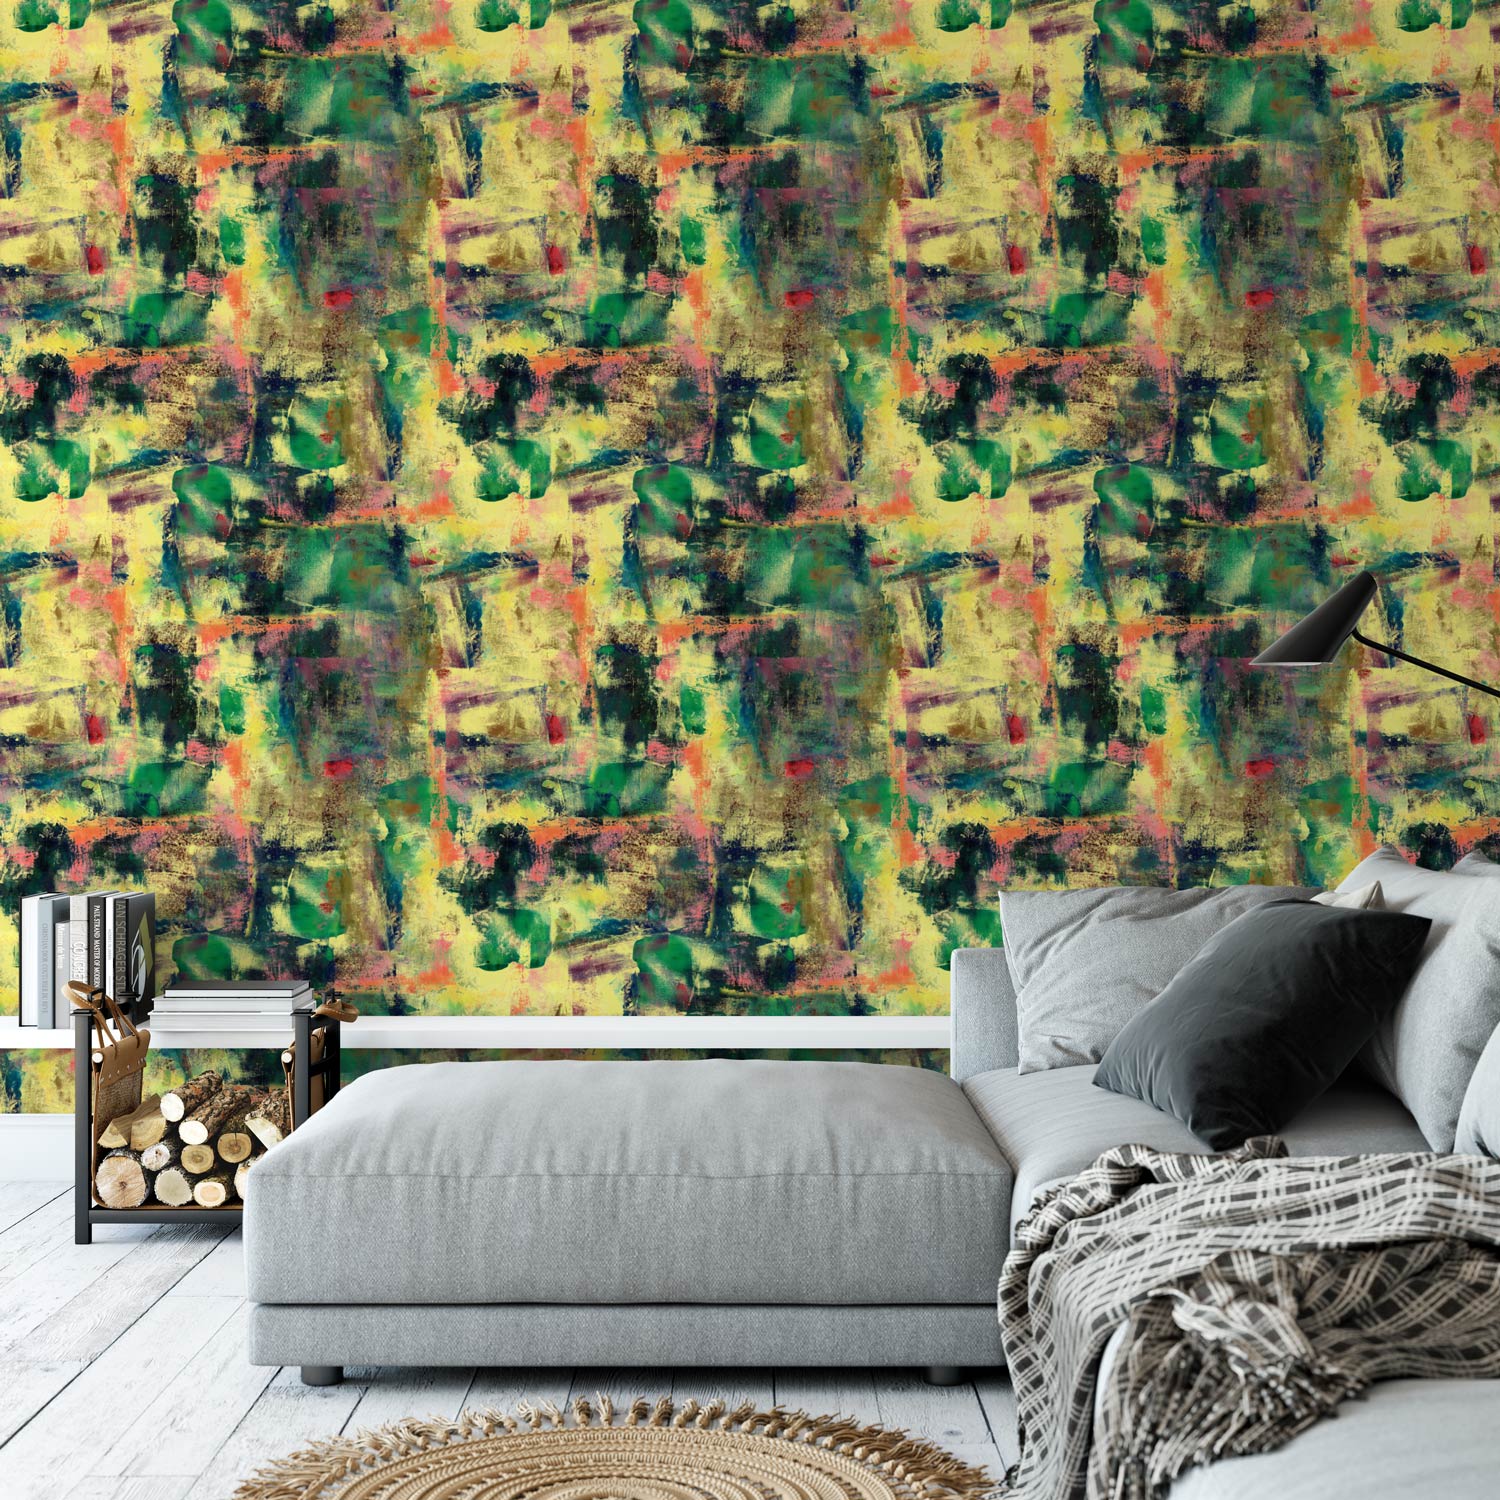 Wild hearted yellow wallpaper displayed in a living room mock up design, next to a grey sofa and other furniture.